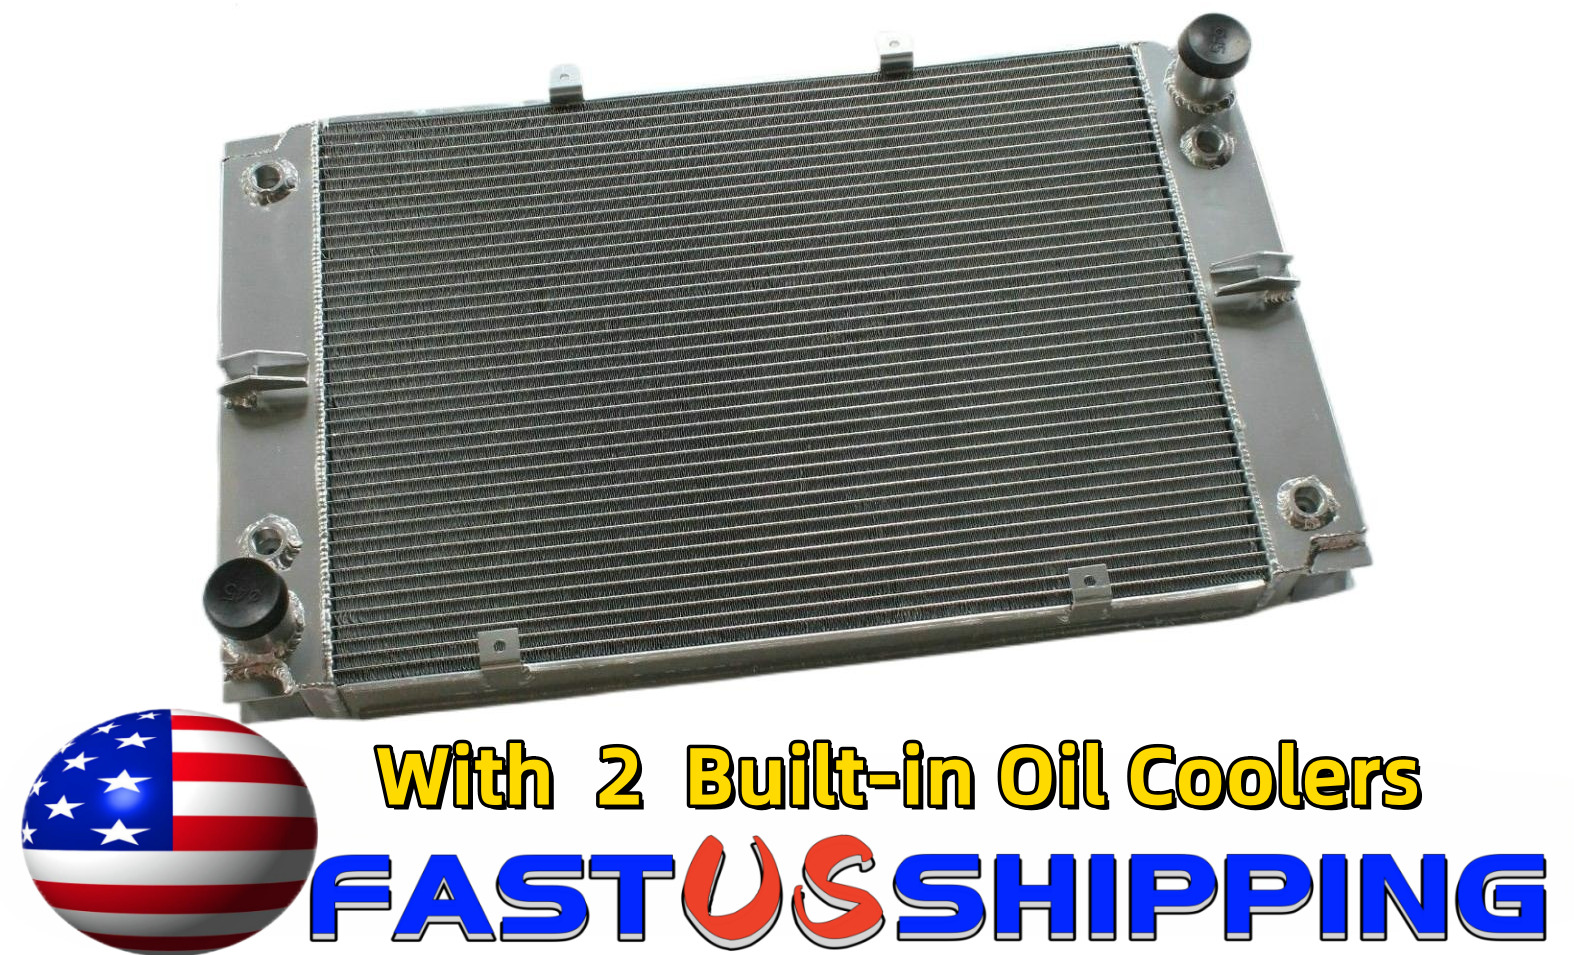 Aluminum Radiator Fit Porsche 928 With 2 Built-in Oil Coolers